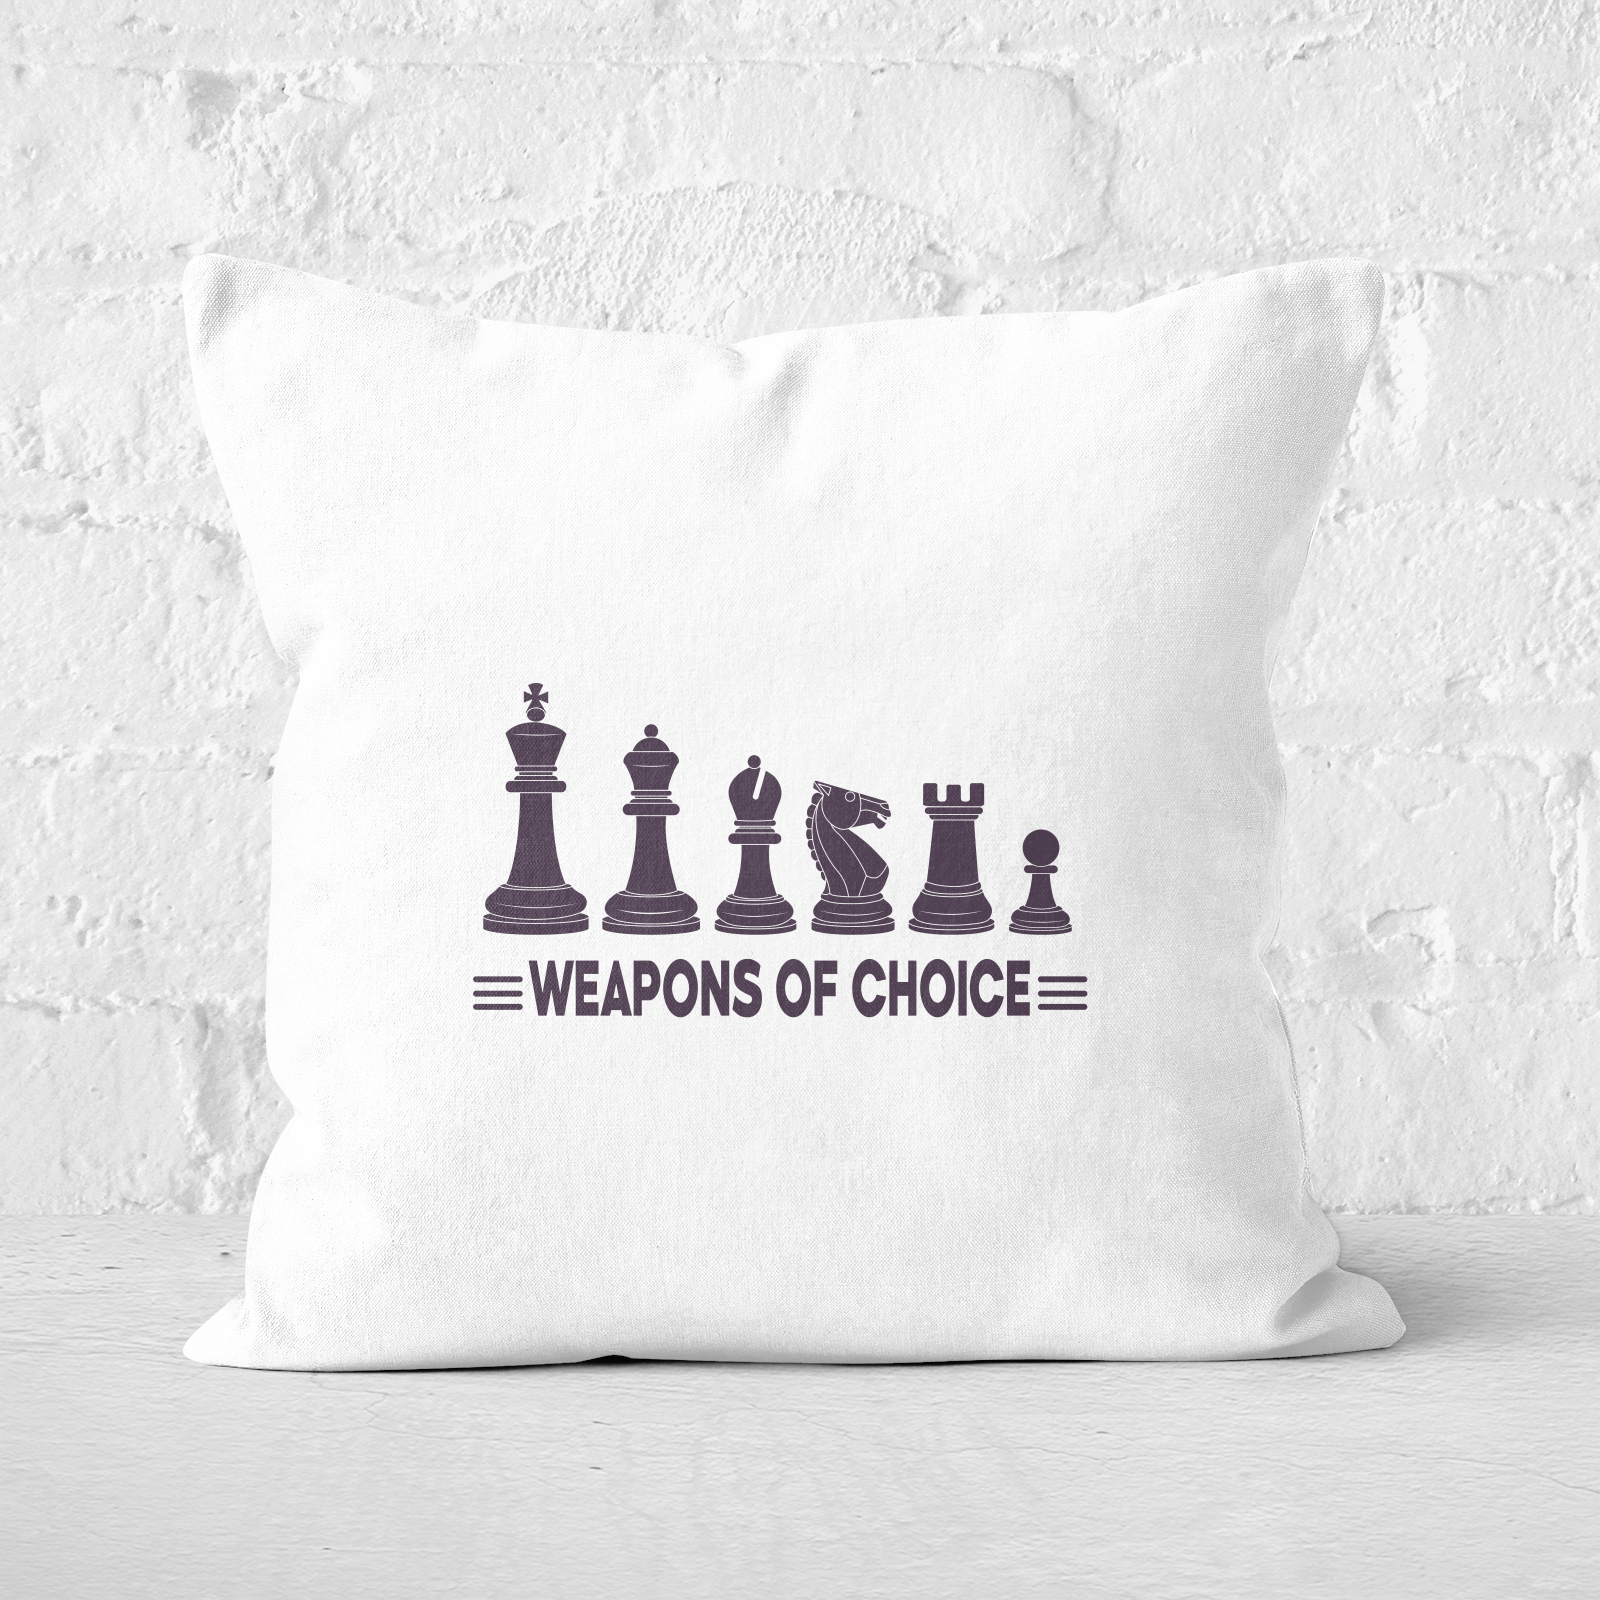 Weapons Of Choice Square Cushion - 60x60cm - Soft Touch